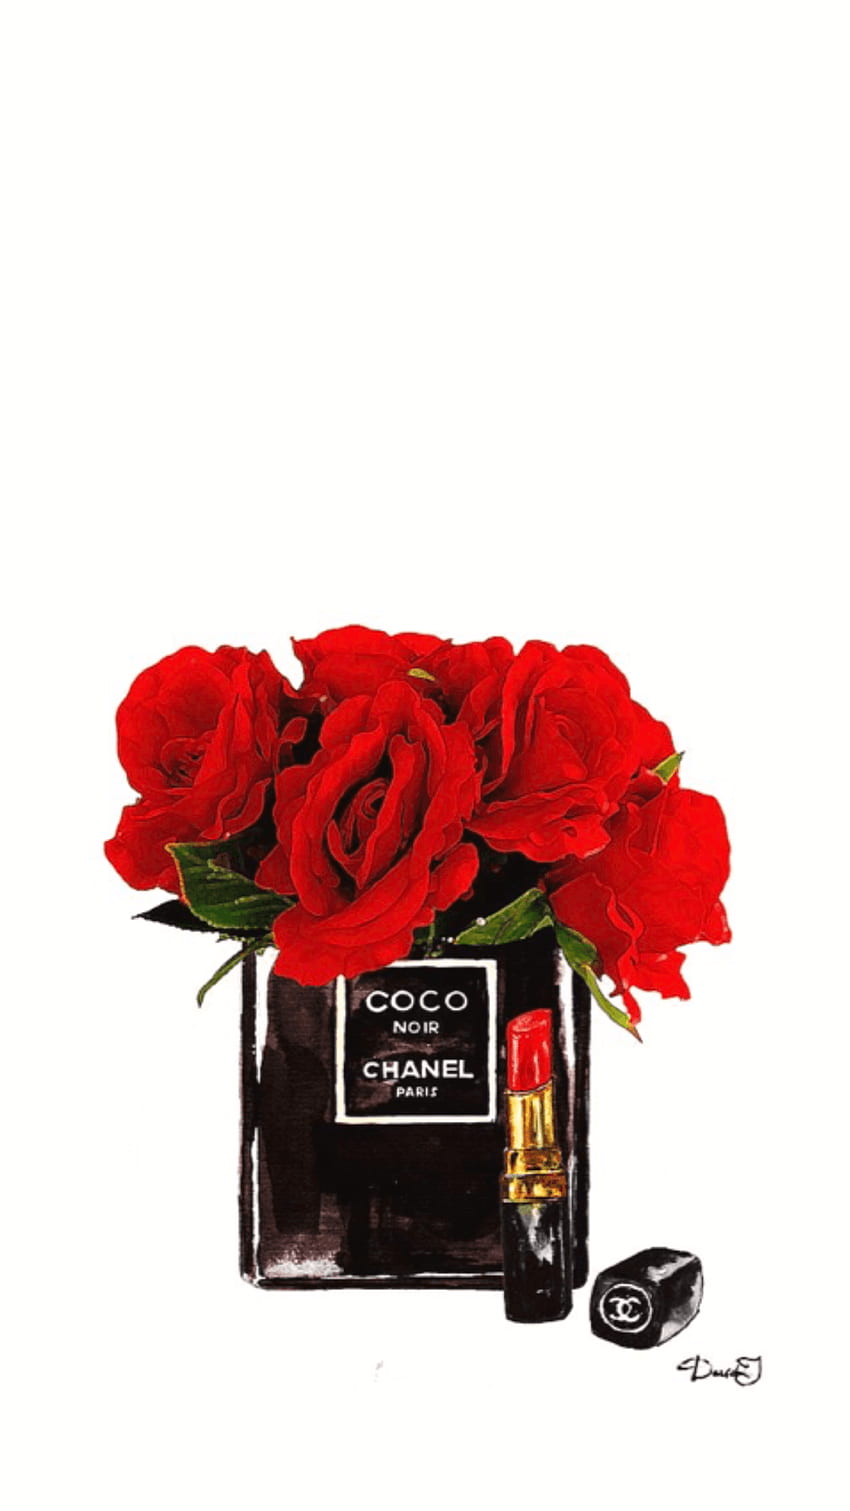 Garden Roses in Chanel No 5 bottle Light 600 - The Glam Pad